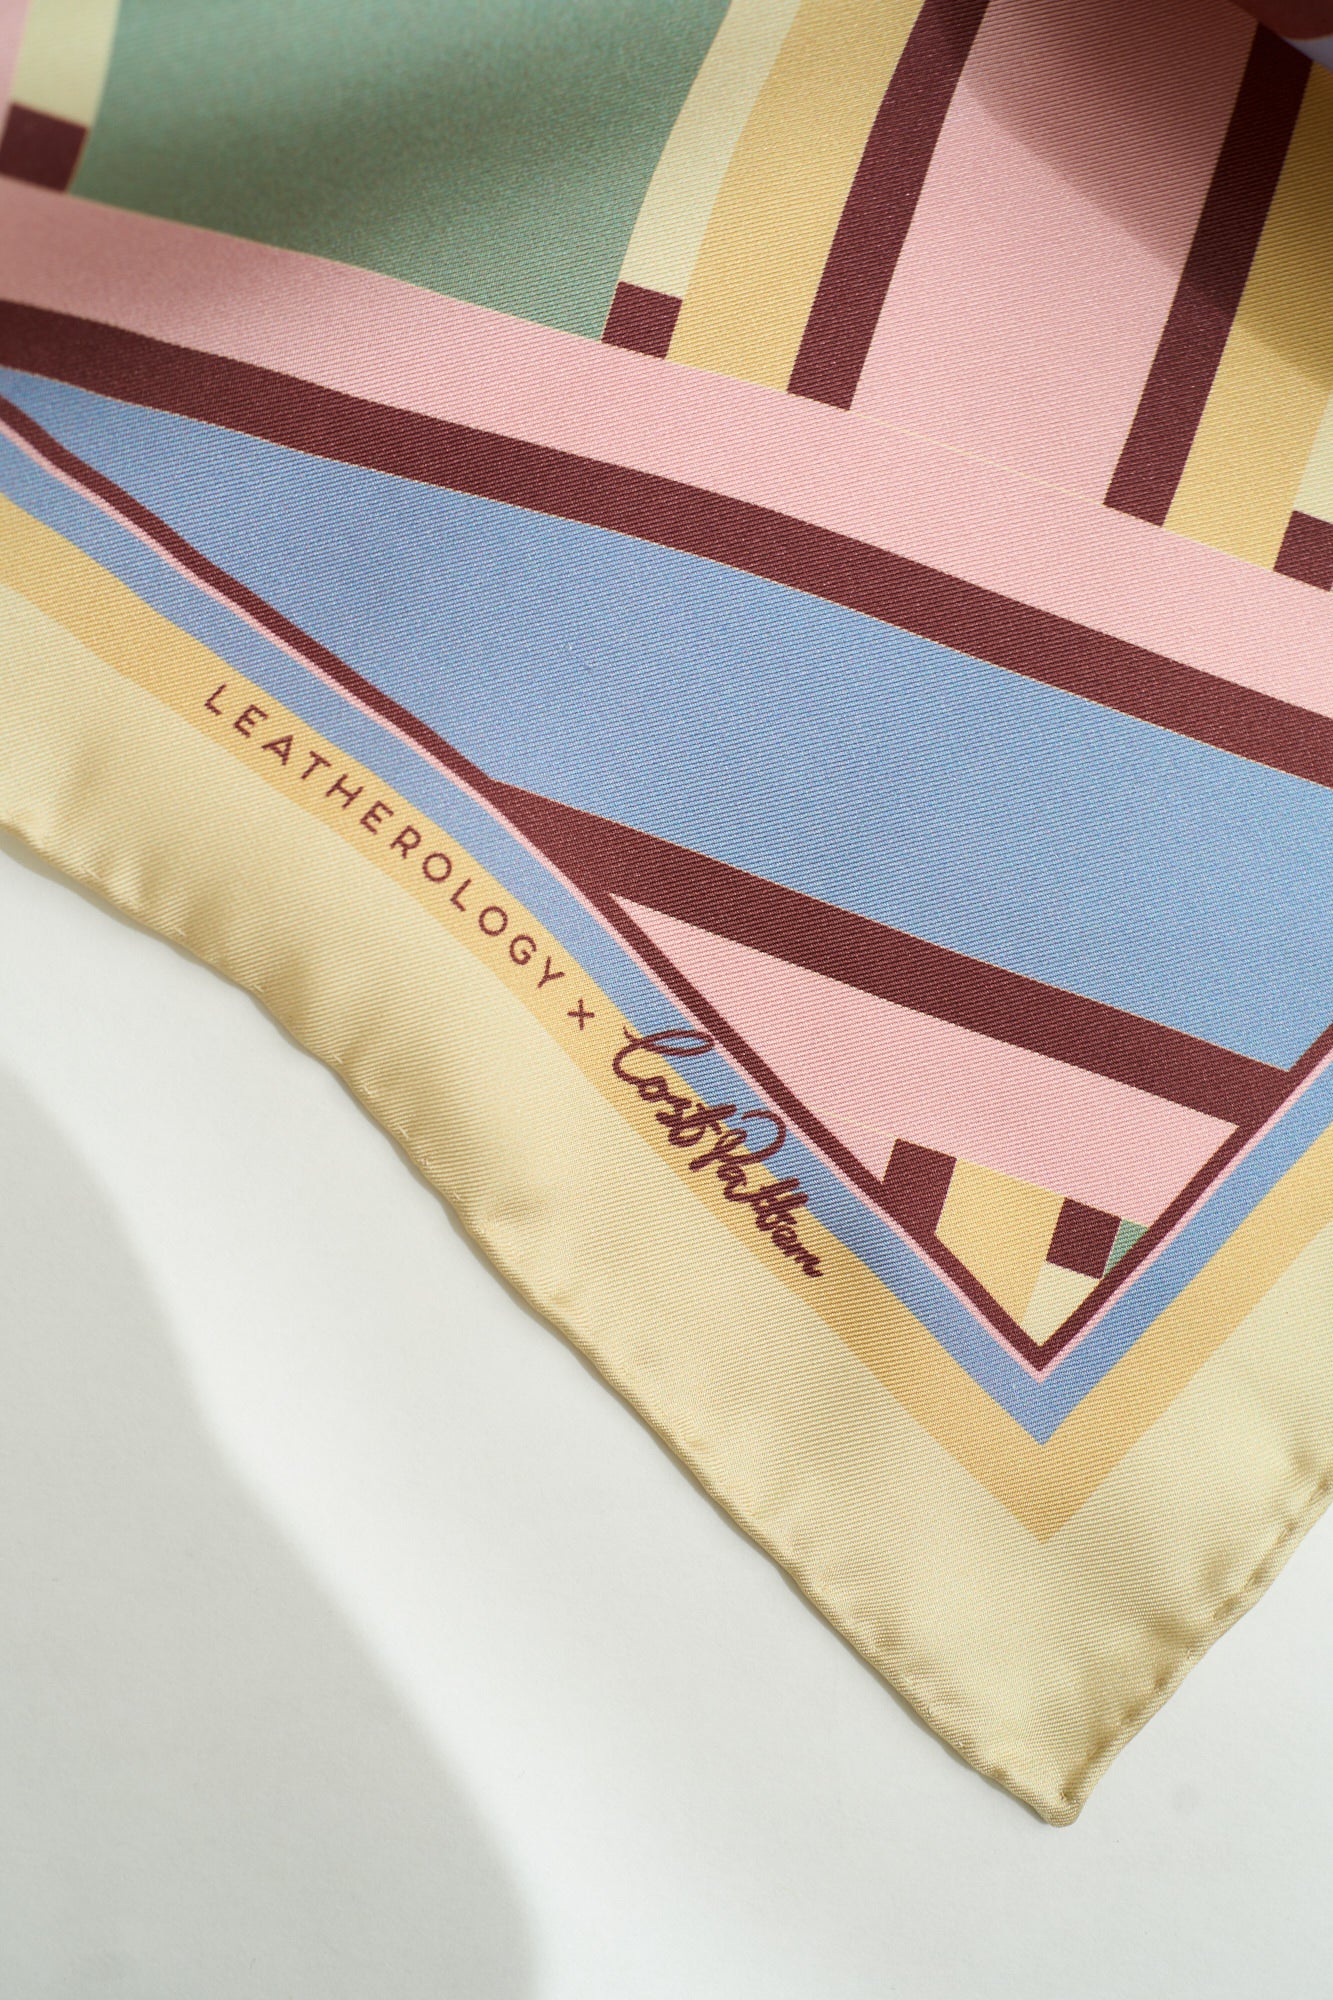 Lost Pattern x Leatherology Silk Square Scarf - Pastel - LOST PATTERN Silk Square Scarf